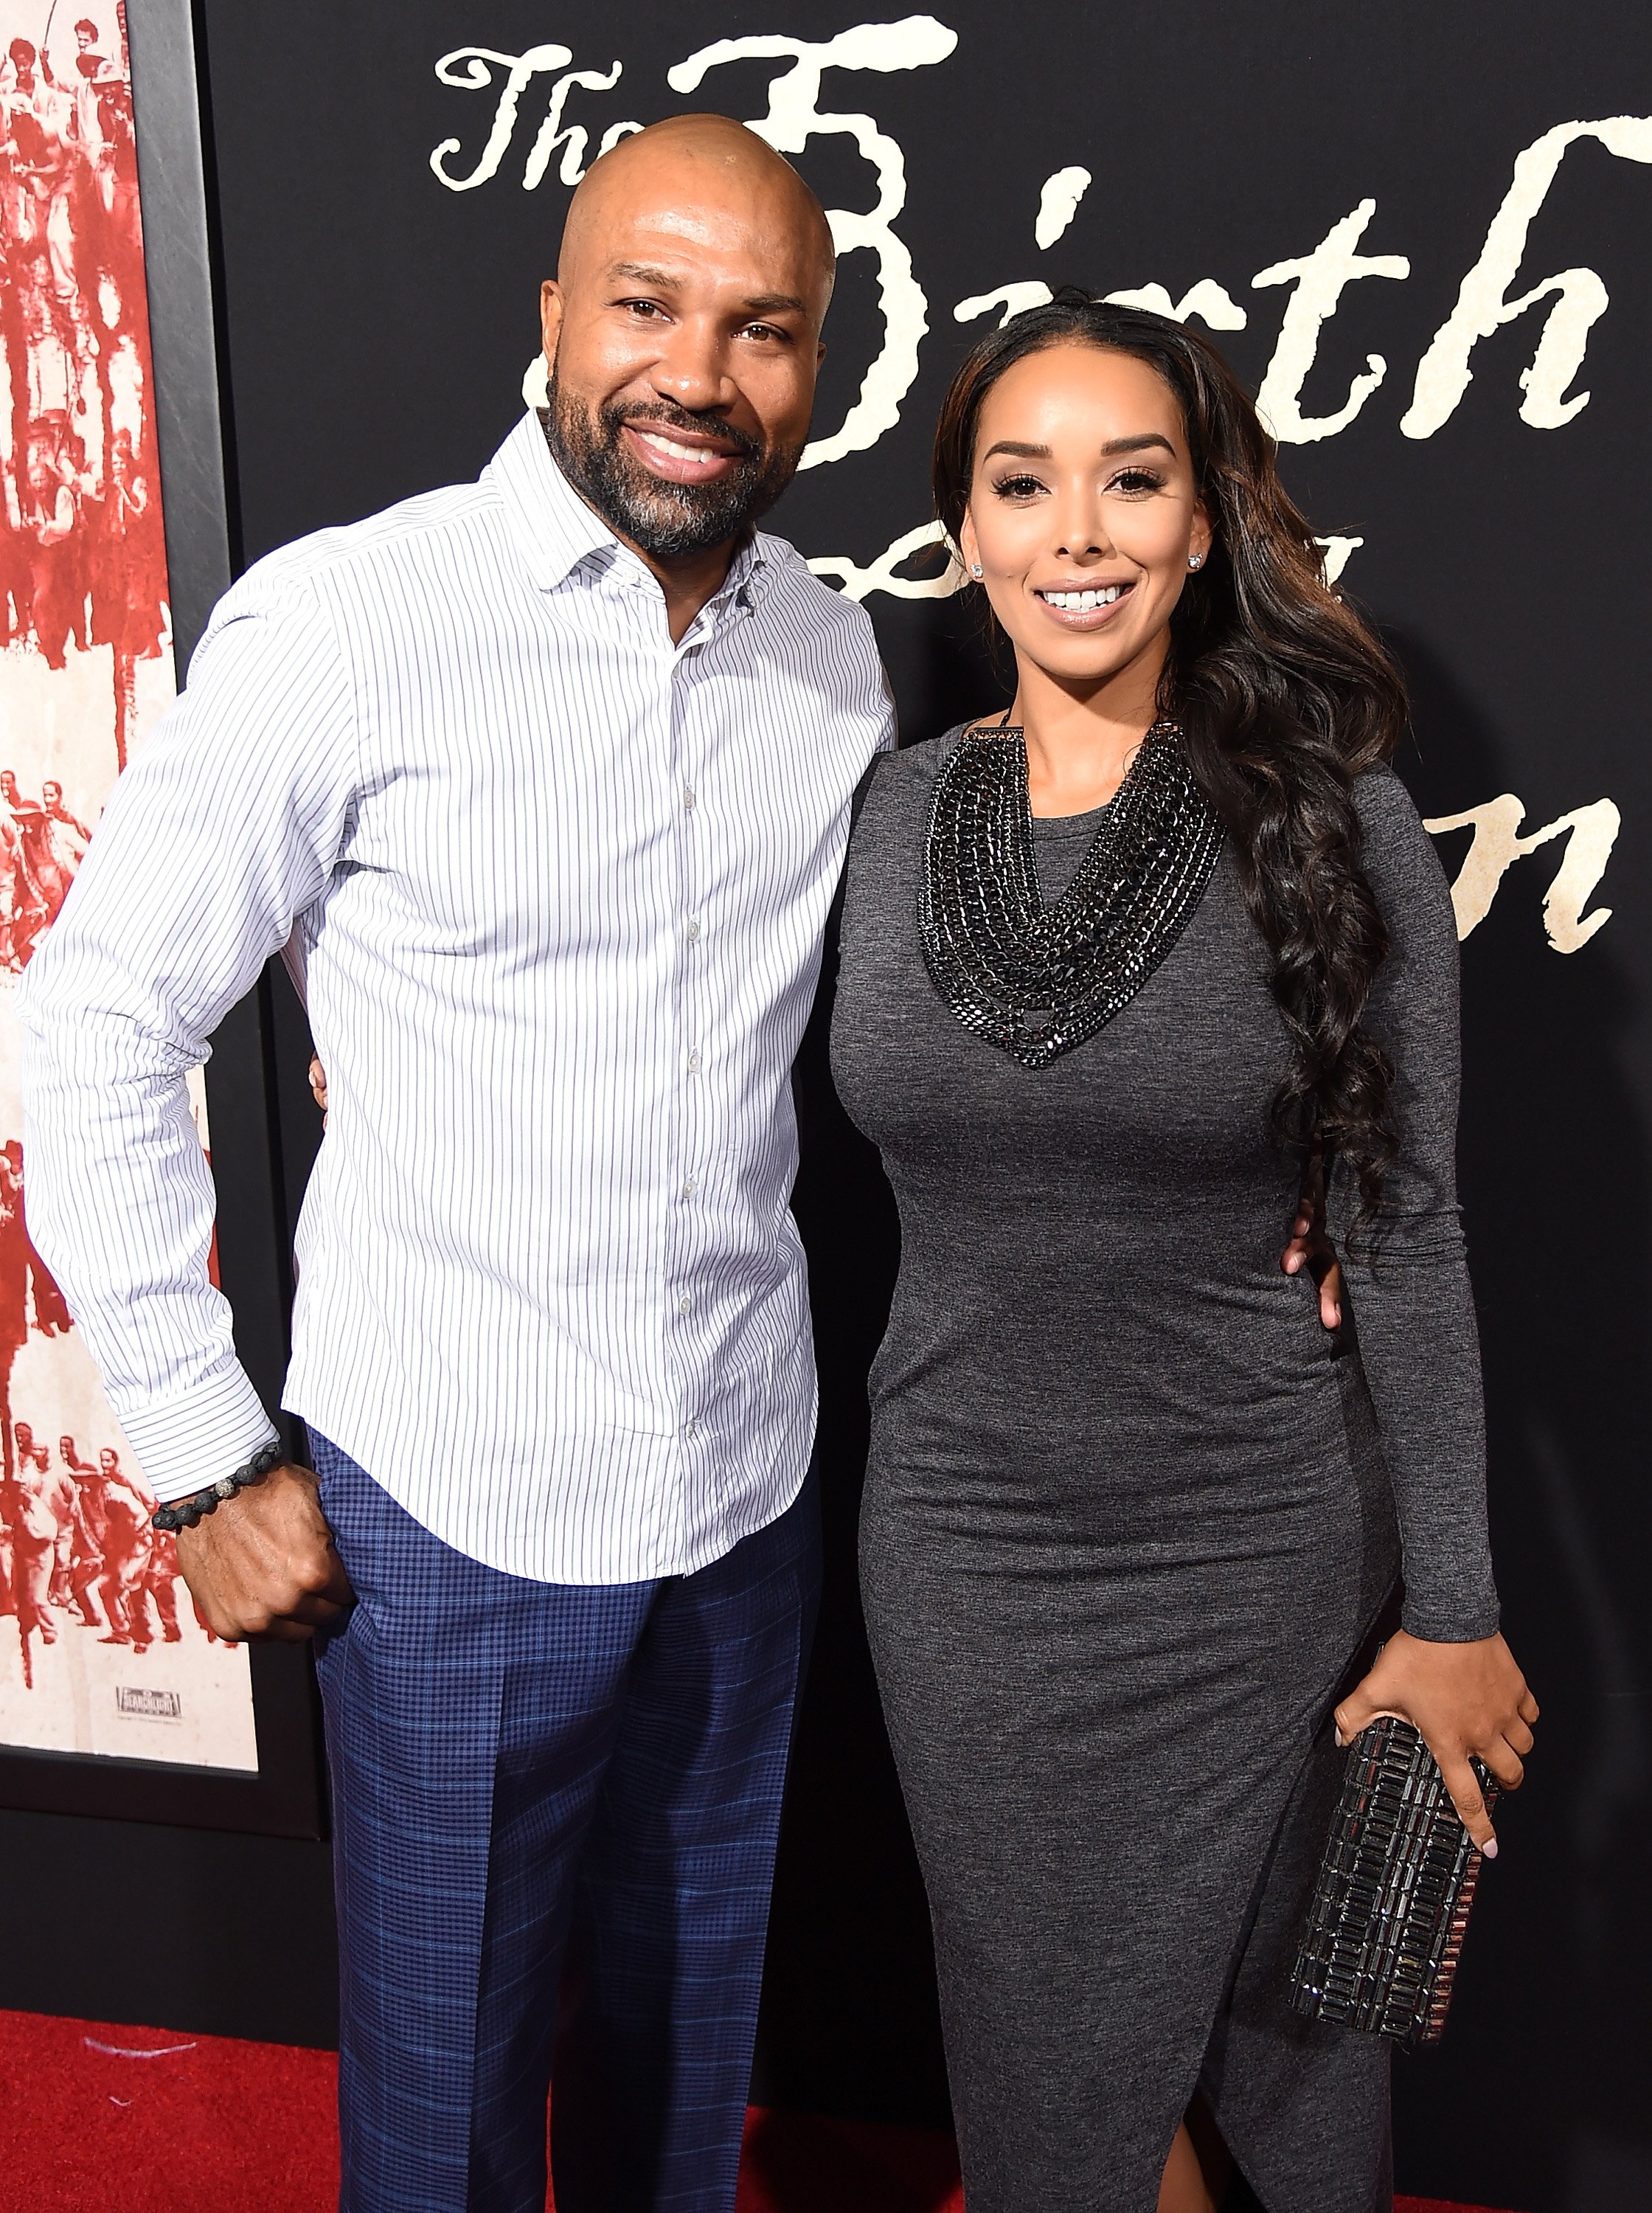 Derek Fisher and Gloria Govan attend the premiere of "The Birth of a Nation" on September 21, 2016 in Hollywood, California. | Source: Getty Images